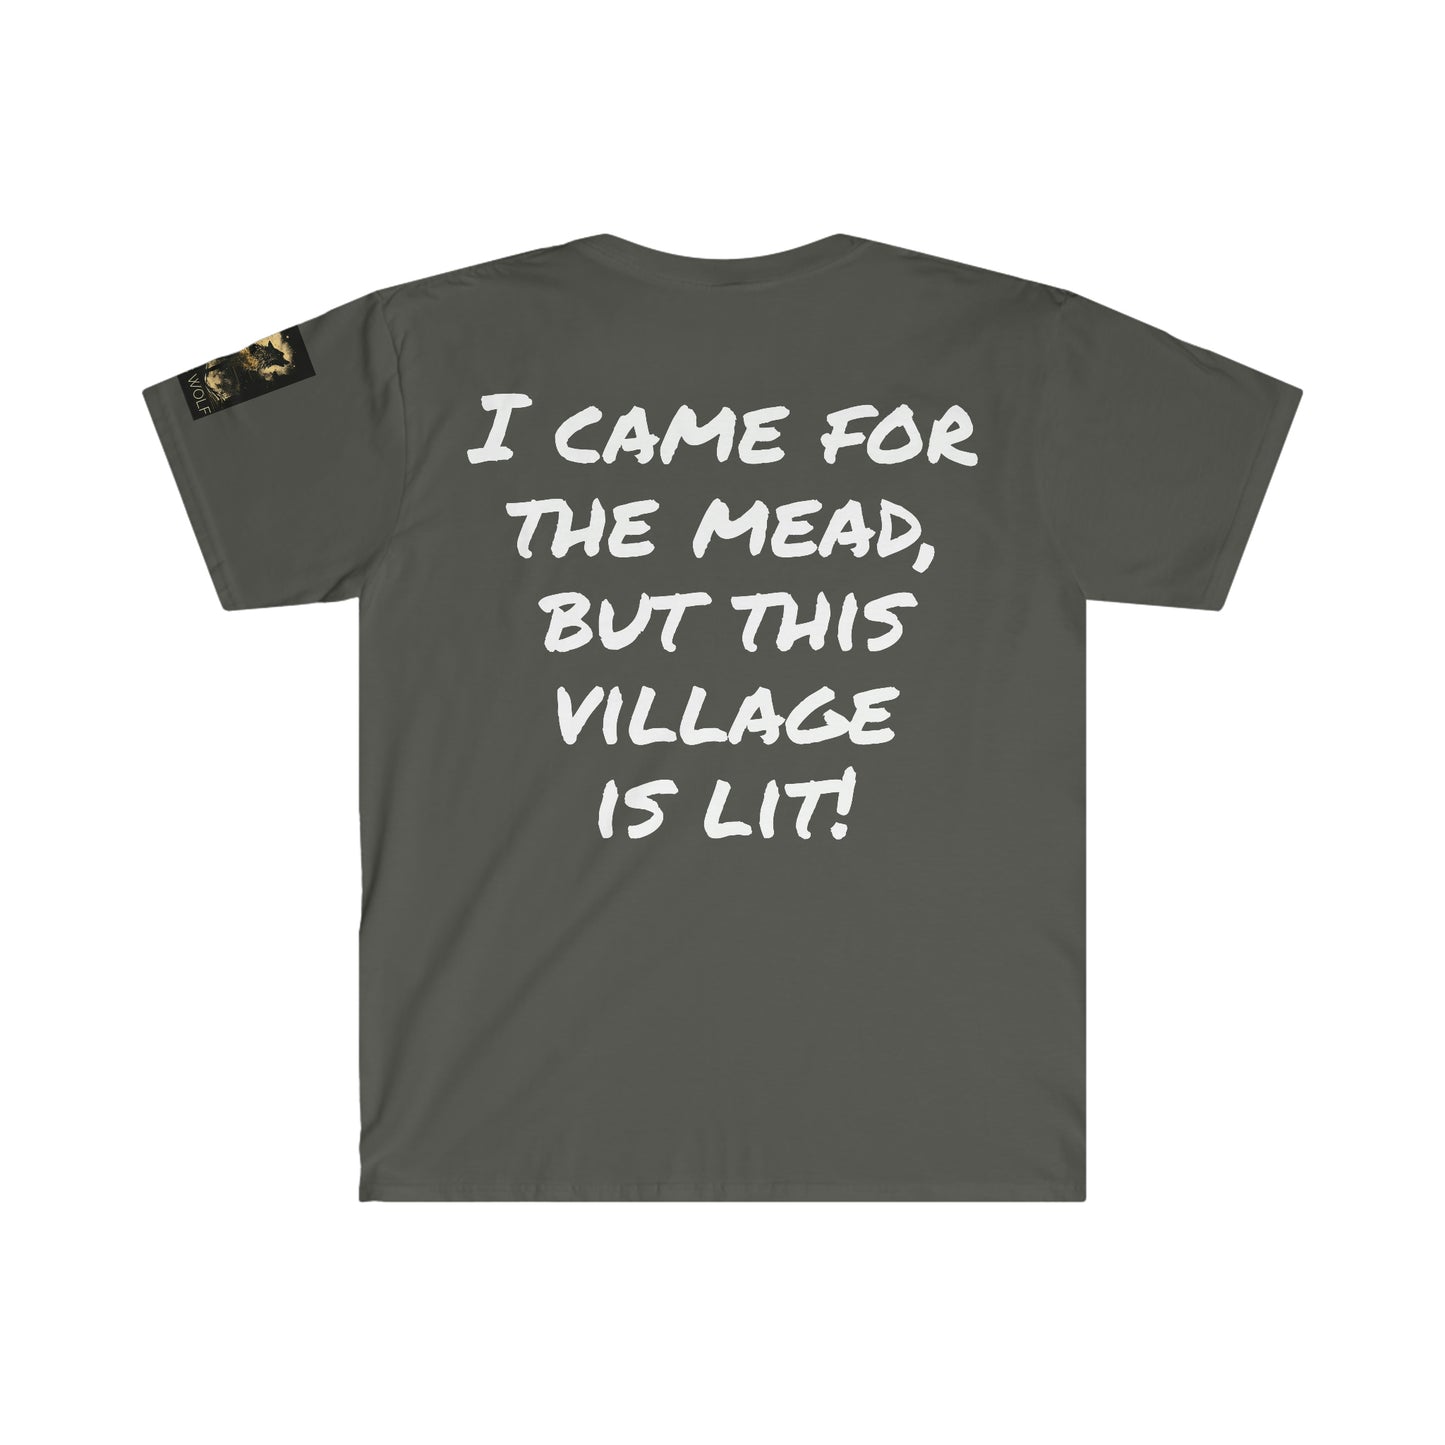 I came for the mead, but this village is lit!